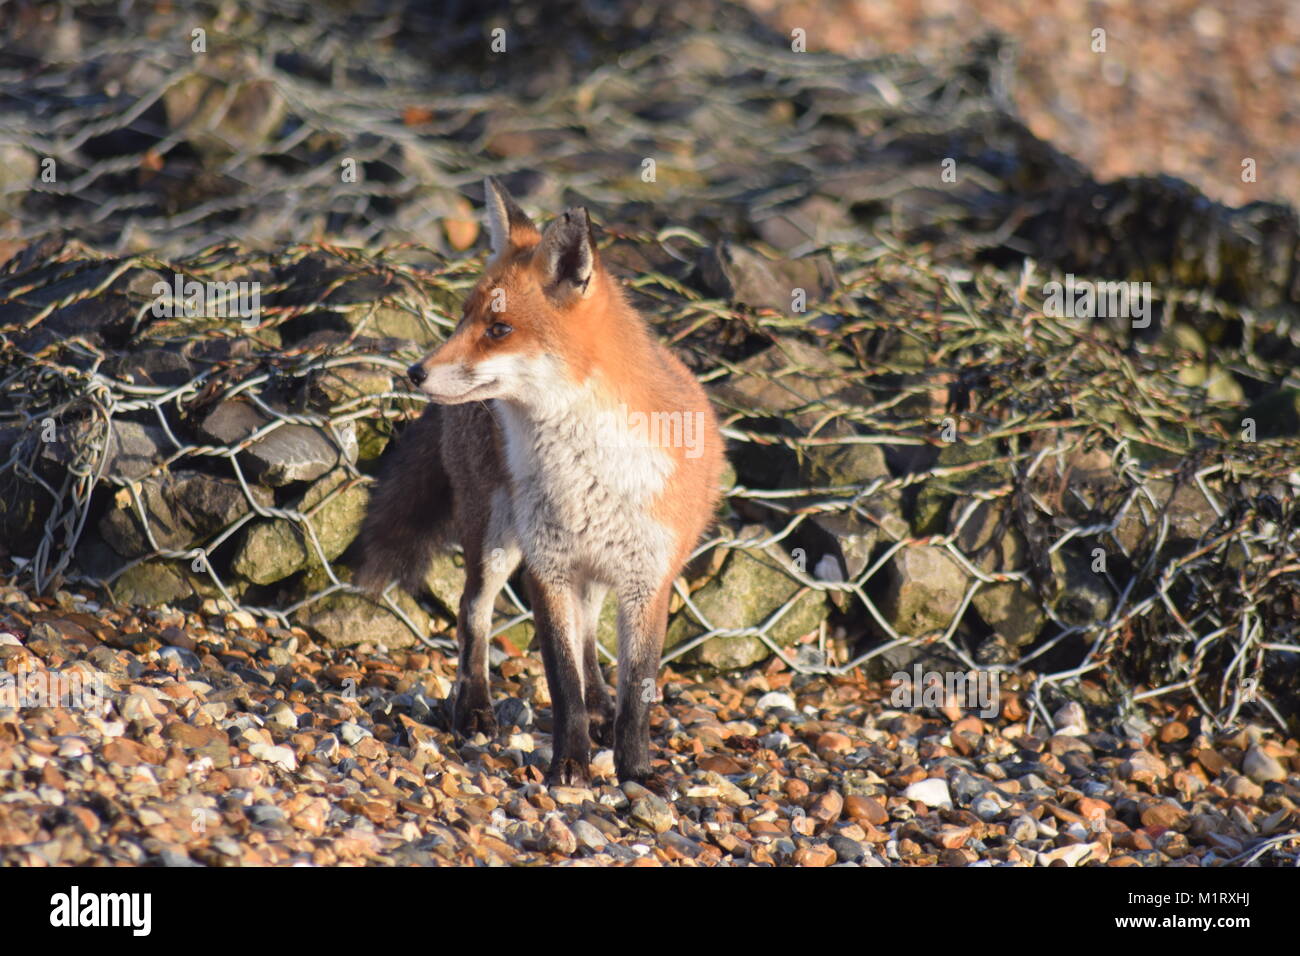 A CHANCE ENCOUNTER WITH THIS INQUISITIVE FOX ON THE SHORE OF LANGSTONE HARBOUR, AT EASTNEY, PORTSMOUTH, UK. EARLY FEBRUARY MORNING. Stock Photo